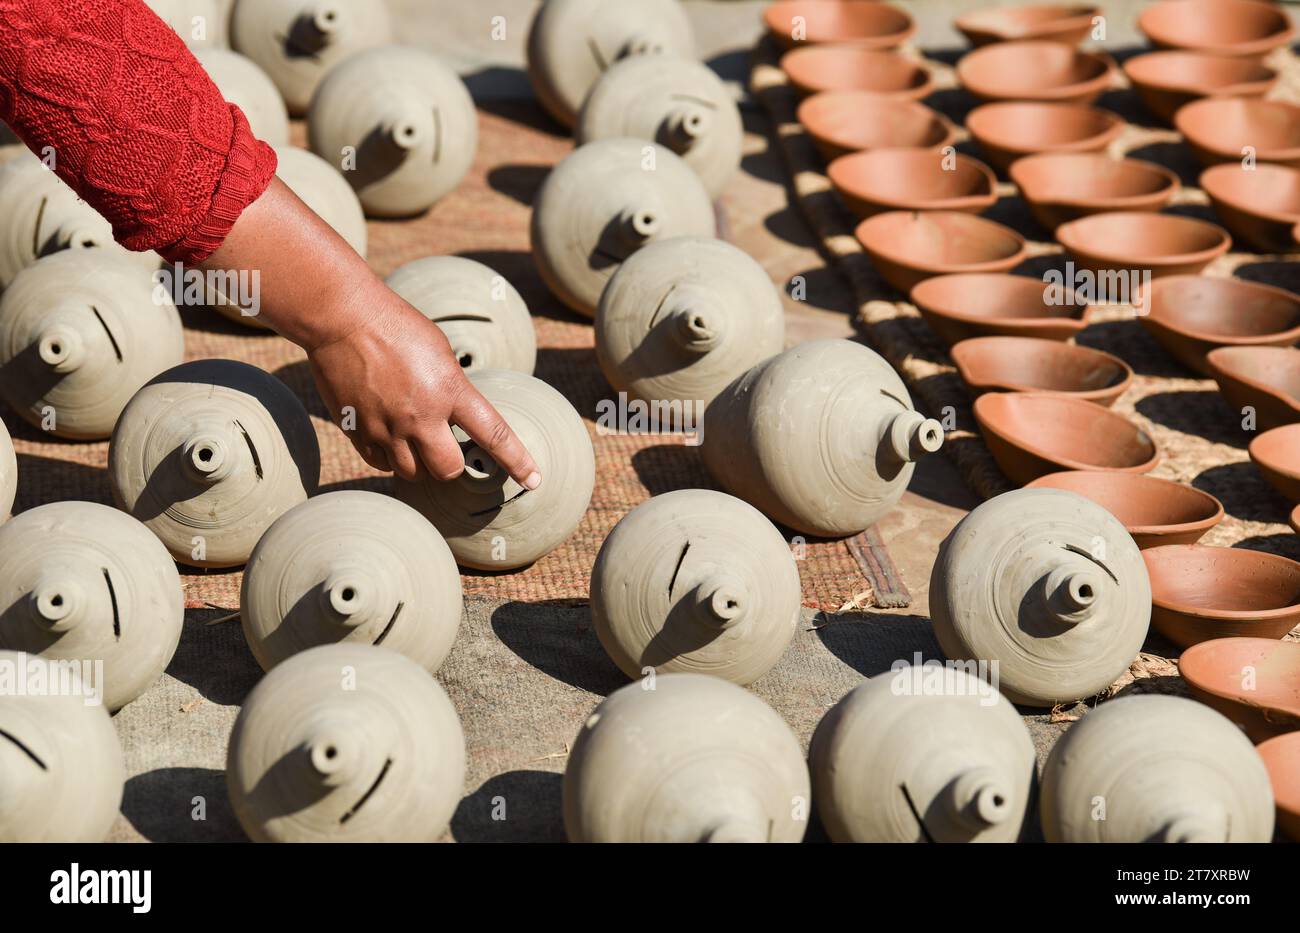 A craftswoman shows off the traditional clay pots she left to dry in the sun, Bhaktapur, Nepal, Asia Stock Photo